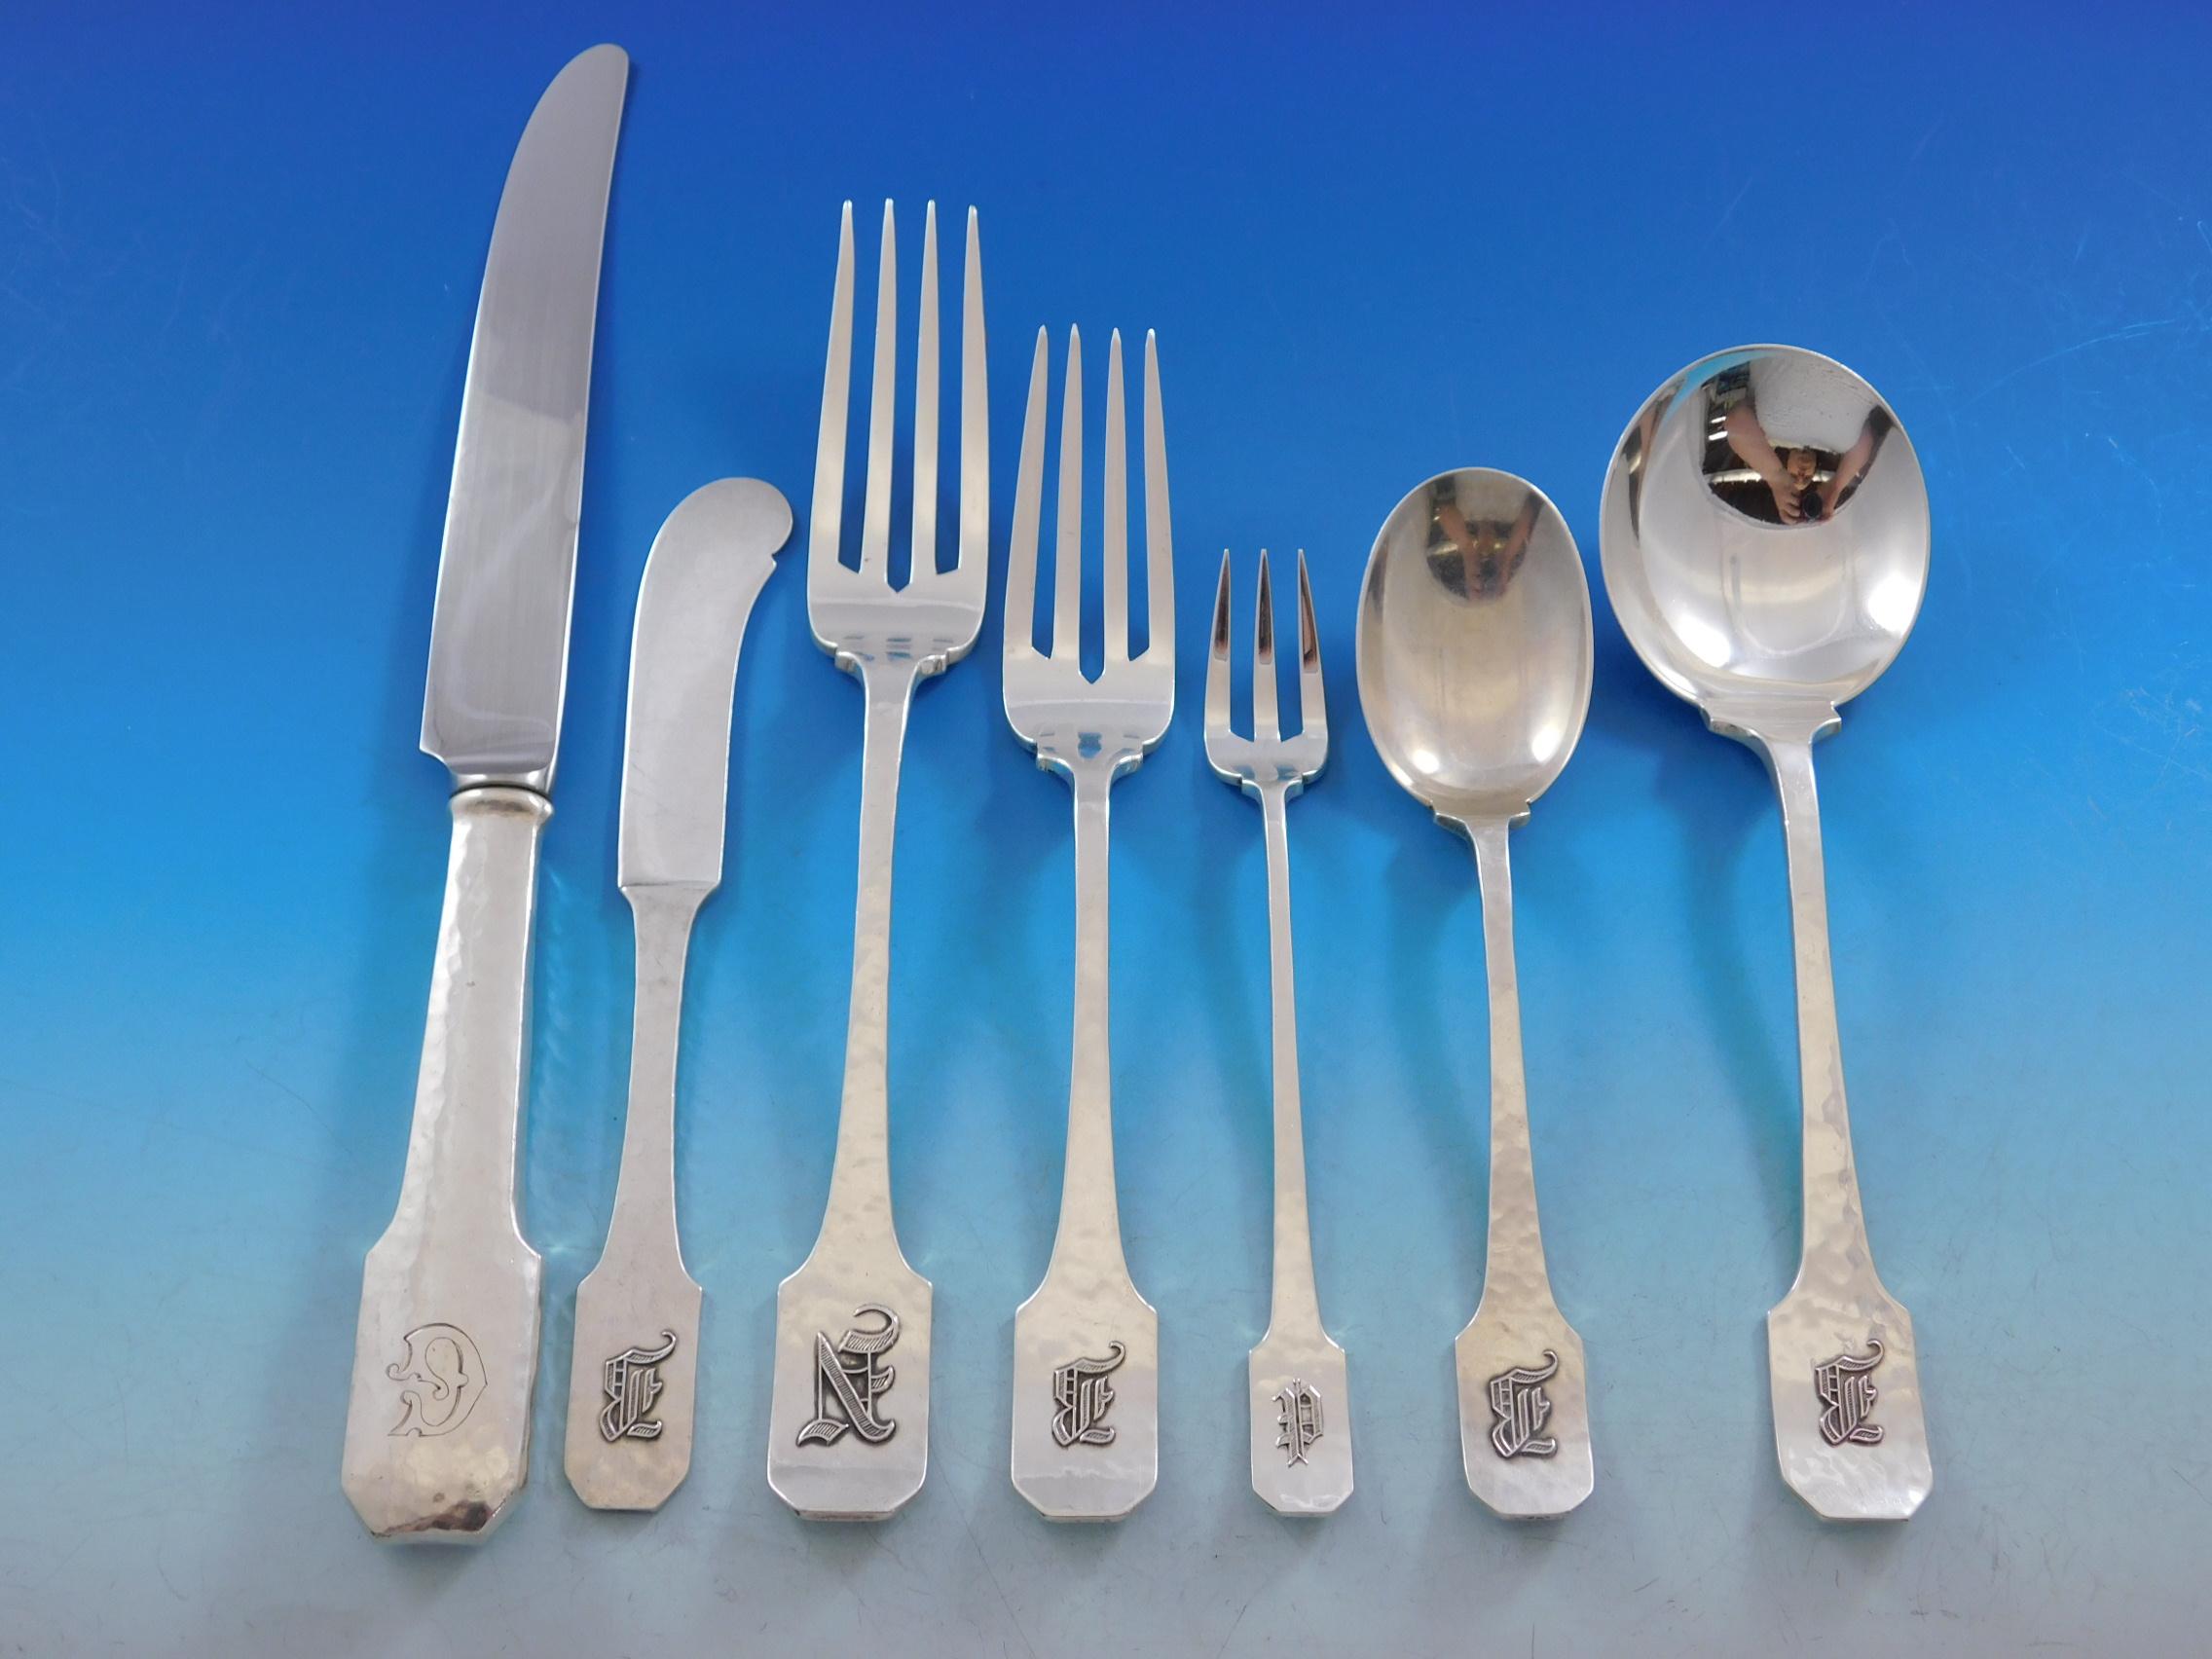 Dinner size Norman hammered by Shreve sterling silver flatware set - 87 pieces. This Arts & Crafts pattern was introduced in the year 1909. This set includes:

8 dinner knives, 9 3/4